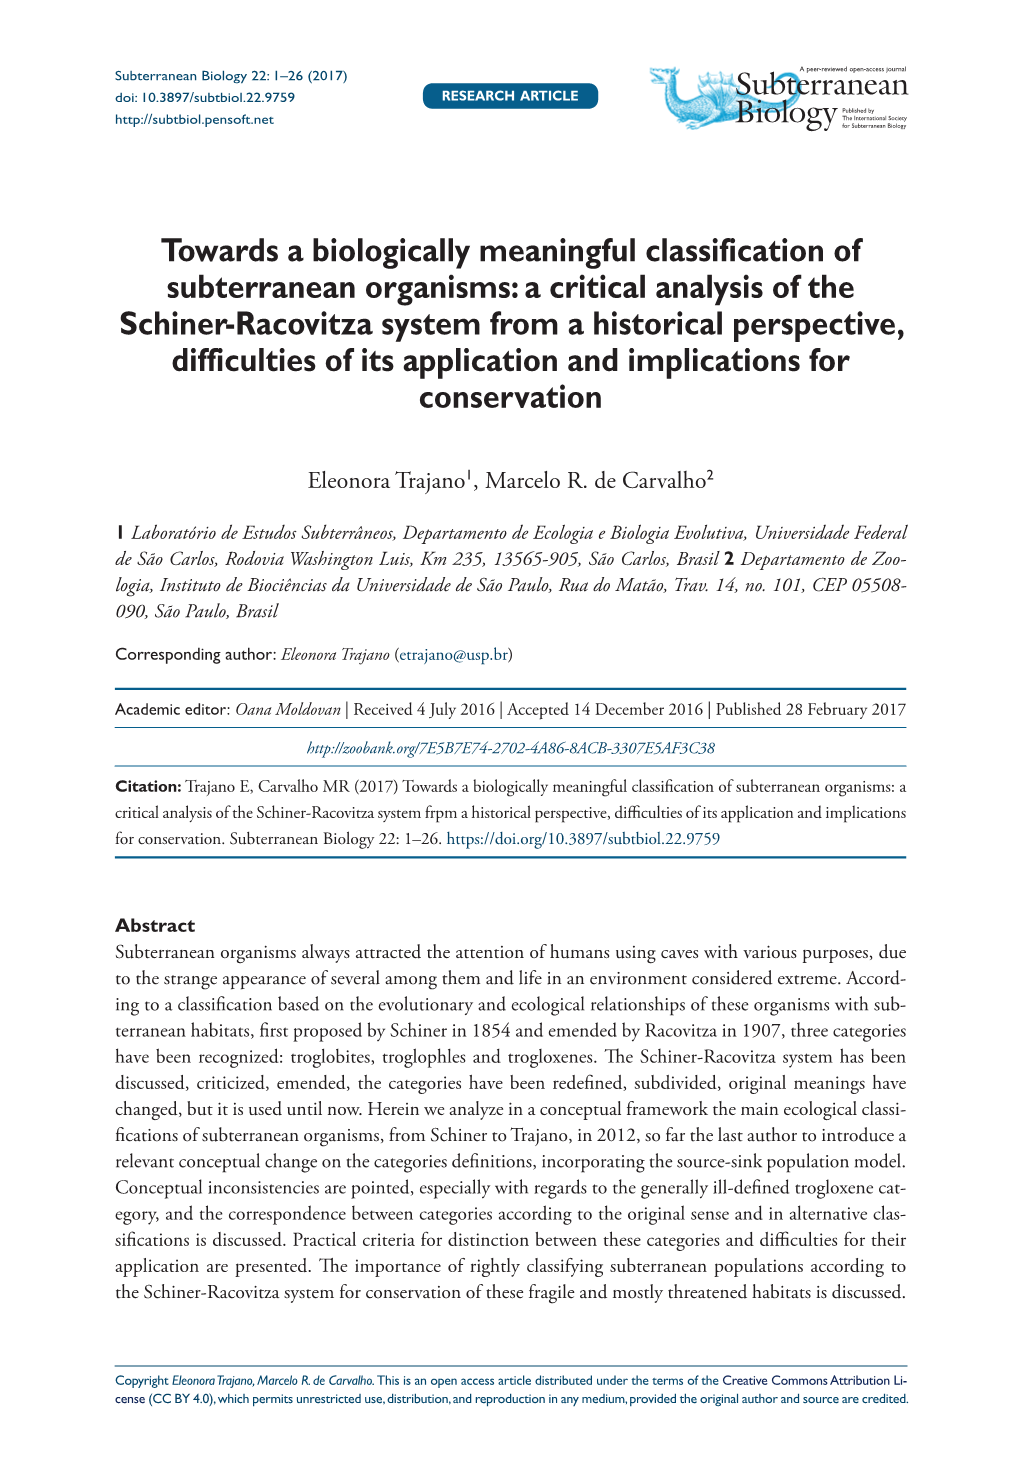 Towards a Biologically Meaningful Classification of Subterranean Organisms: a Critical Analysis of the Schiffner-Racovitza System Frpm a Historical Perspective, Difficulties of Its Application And